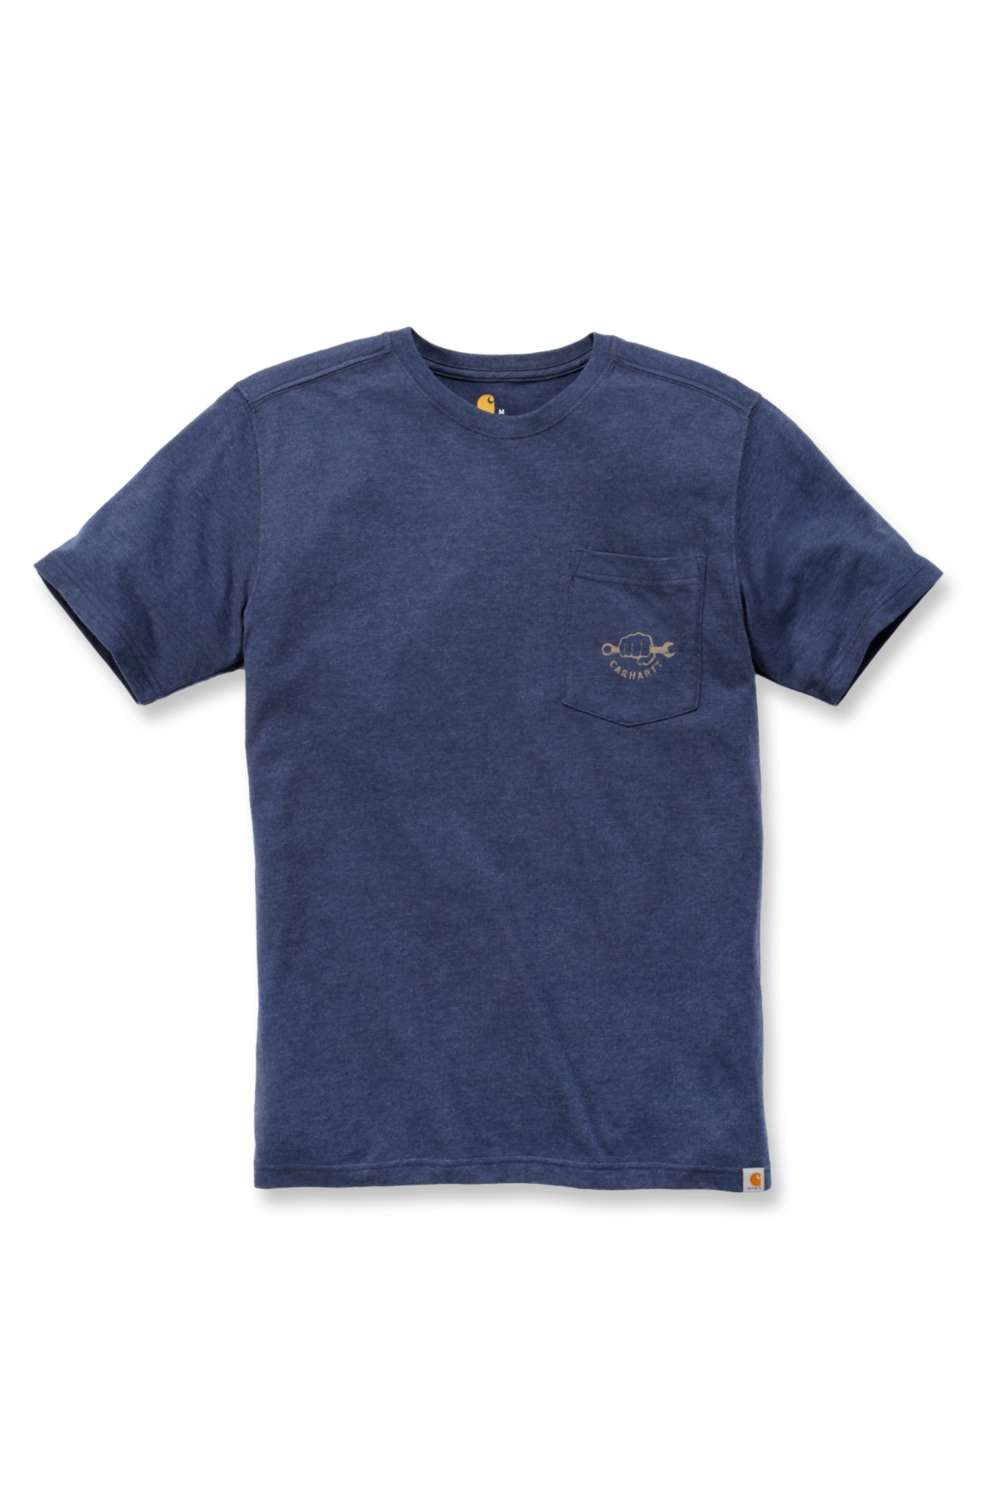 Men's t-shirt with pocket made of durable cotton blend with Carhartt print.